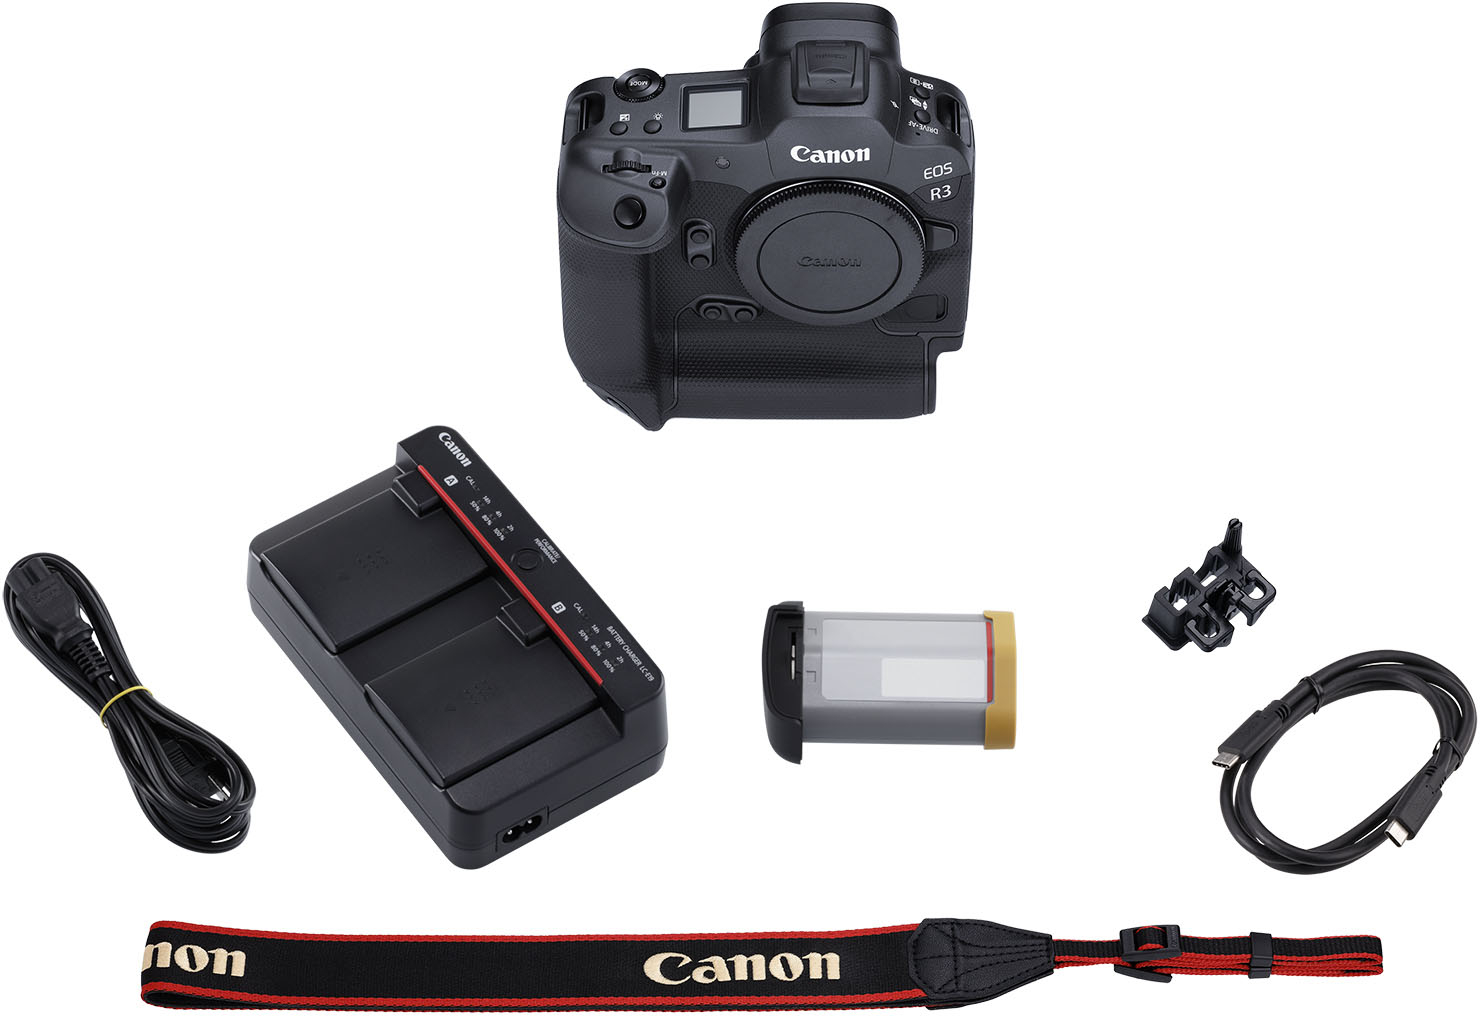 Canon EOS R3 Mirrorless Camera (Body Only) Black 4895C002 - Best Buy